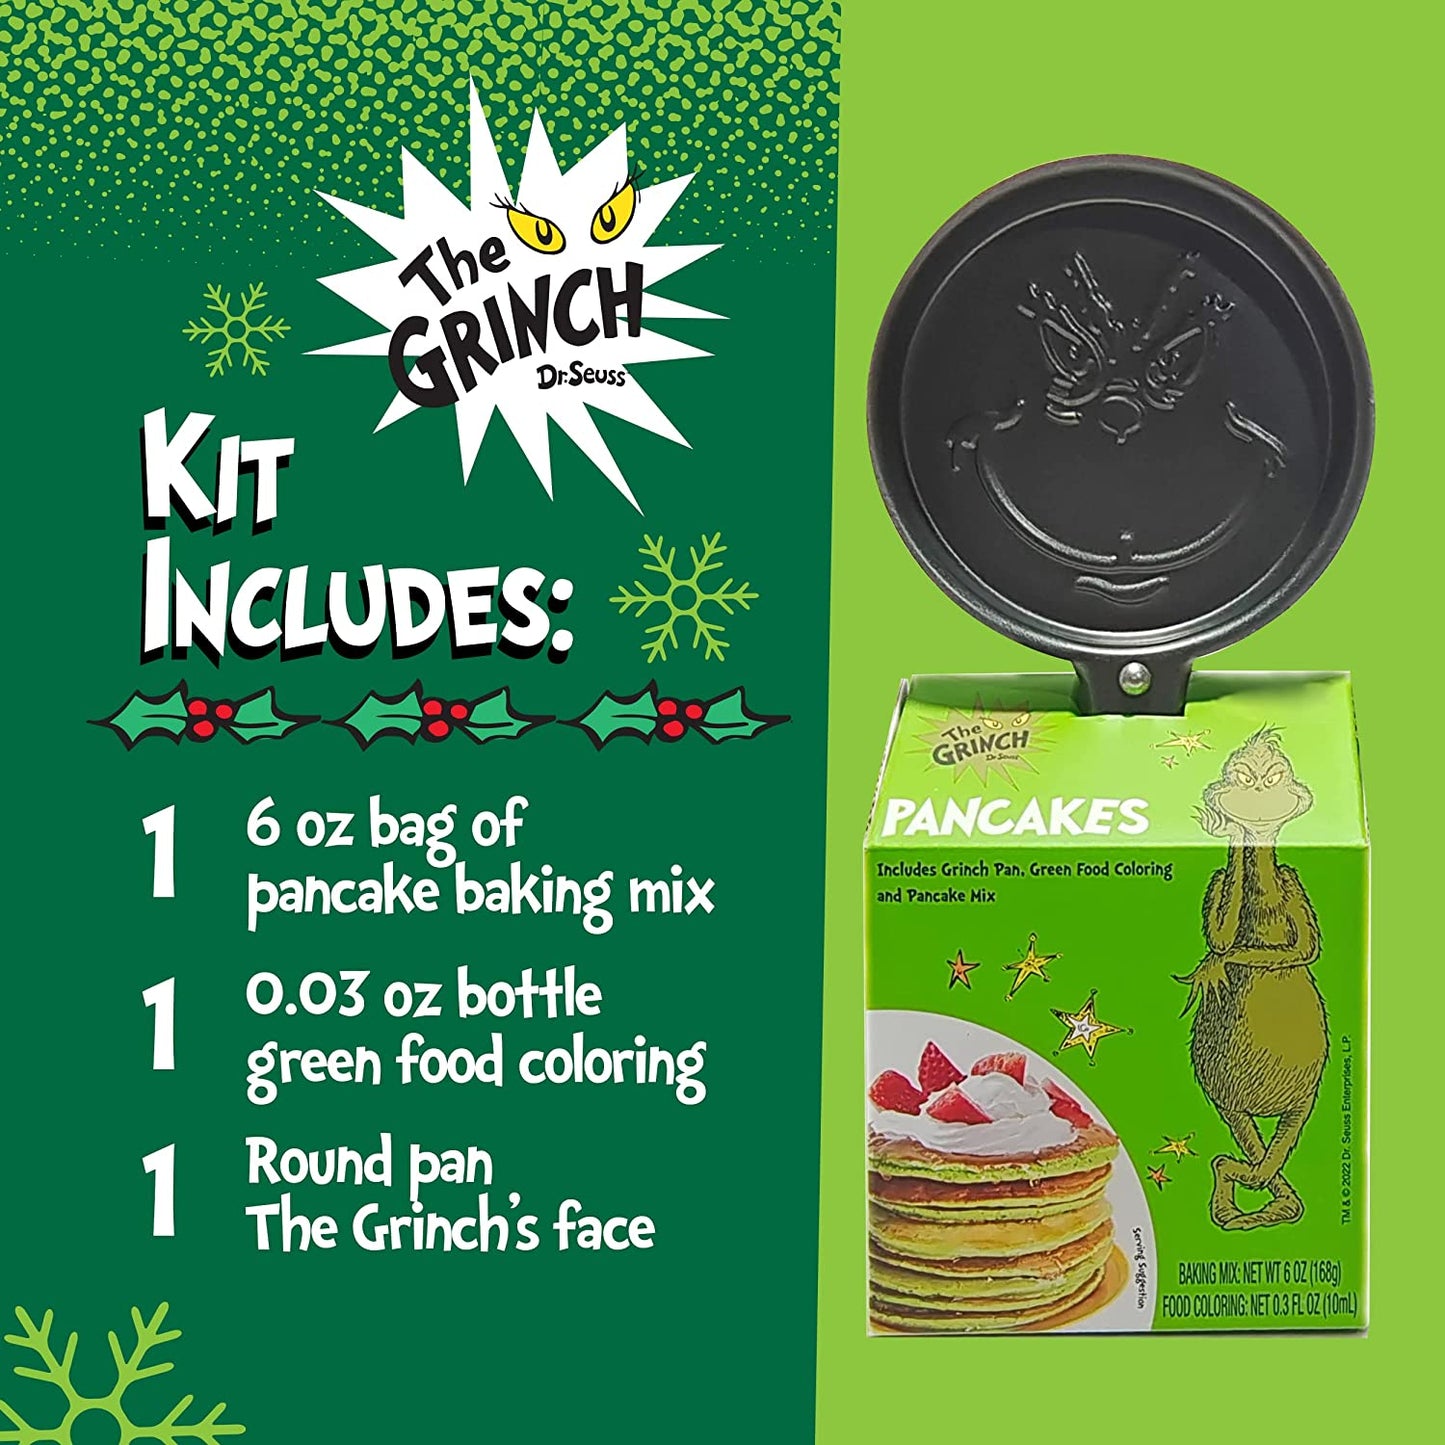 Making pancakes with The Grinch pancake molds 💚🫶 #thegrinch #grinch